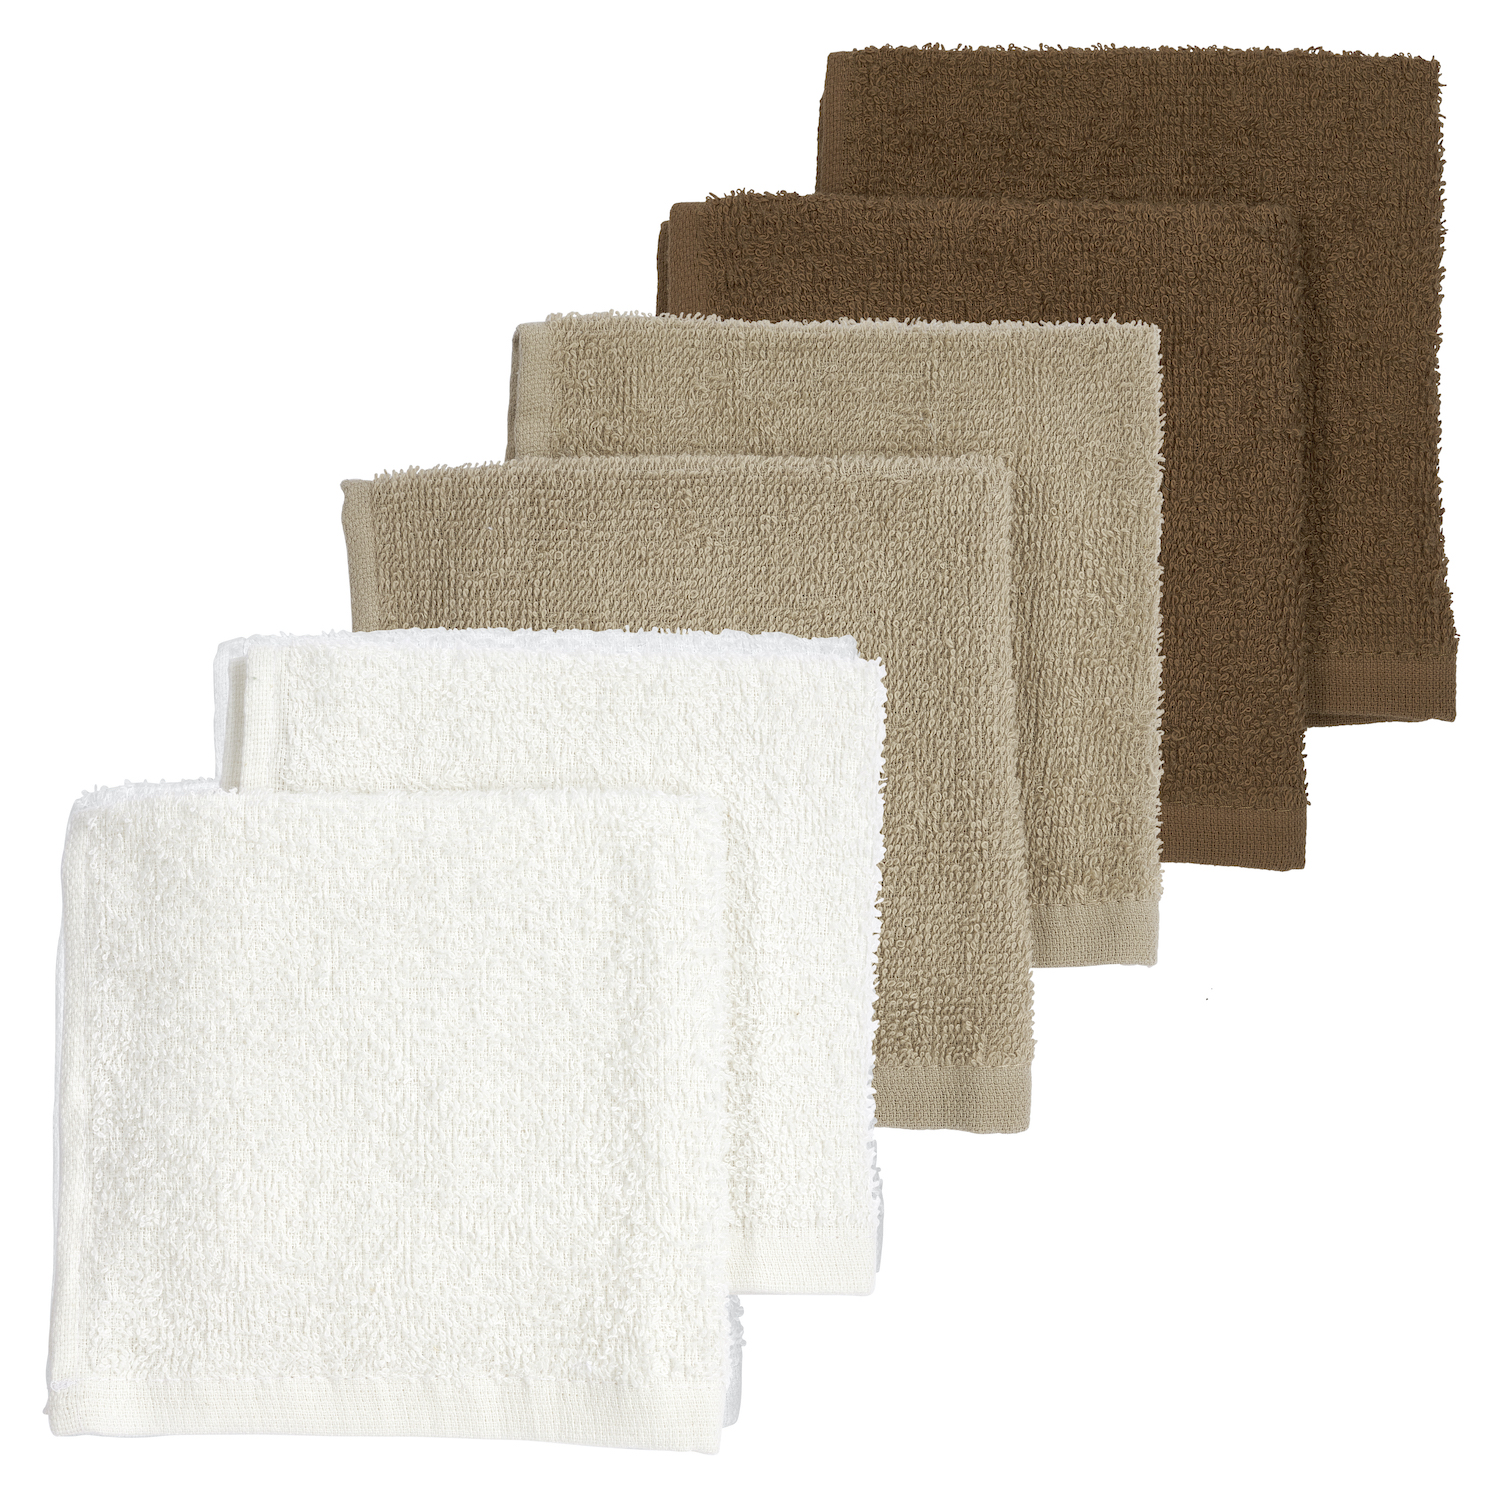 Spucktücher Frottee 6-pack  - Offwhite/Taupe/Chocolate - 30x30cm